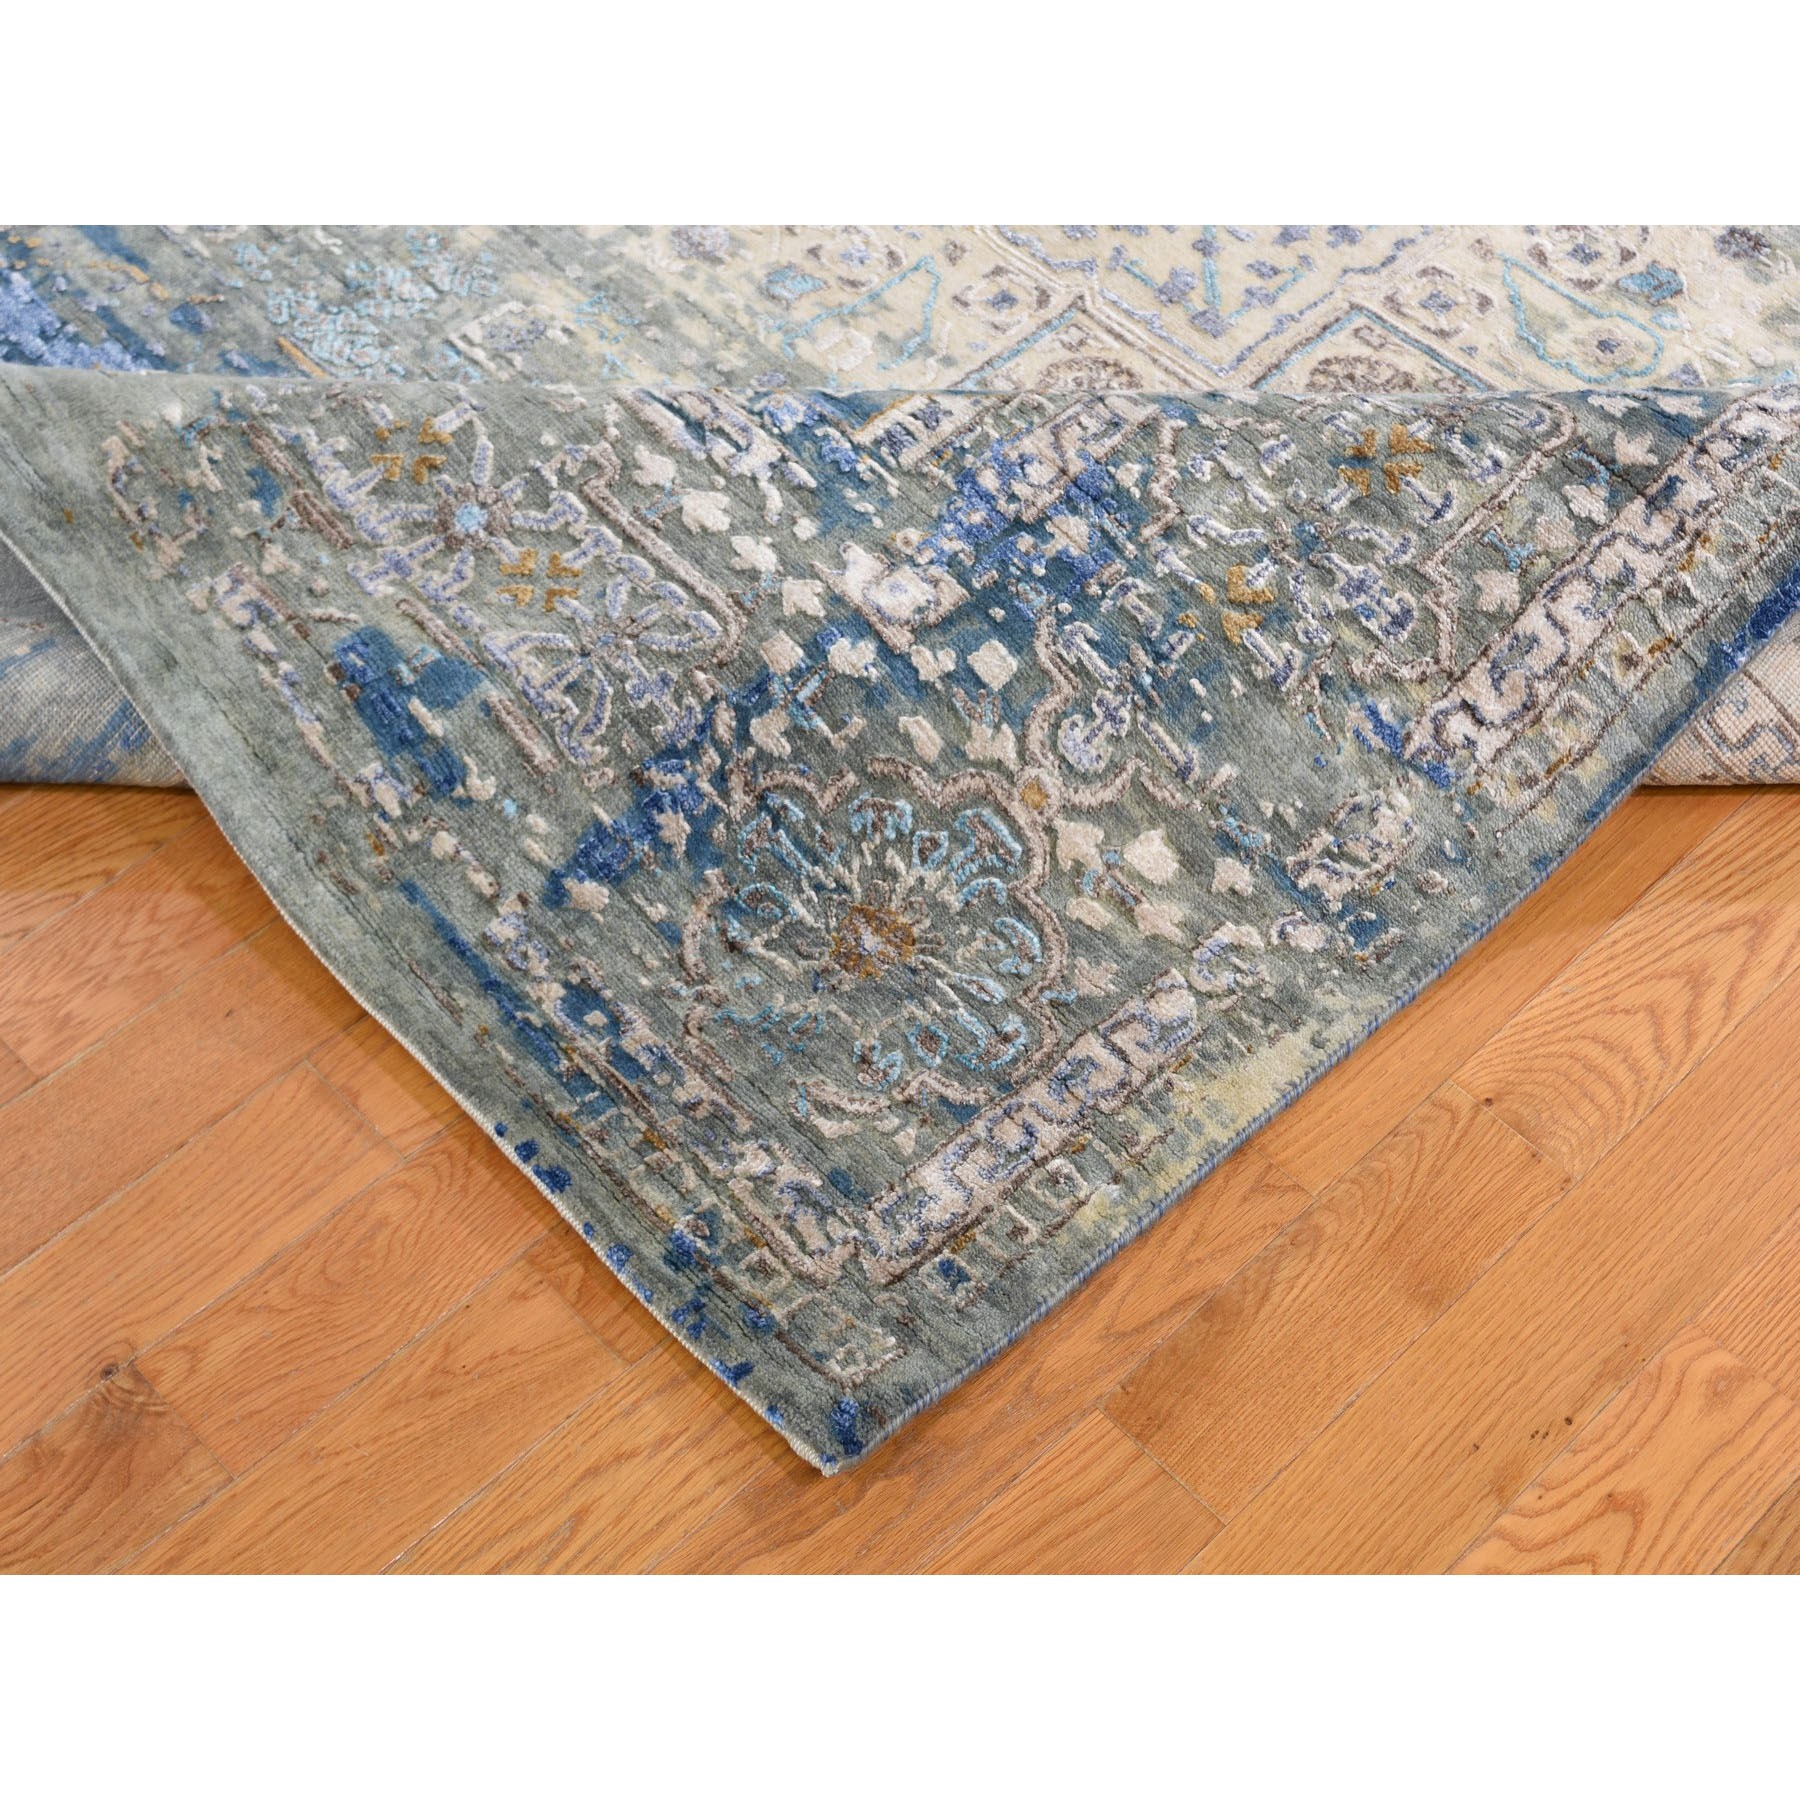 8-x9-10  Silk With Textured Wool Hi-Low Pile Mamluk Design Hand Knotted Fine Oriental Rug 